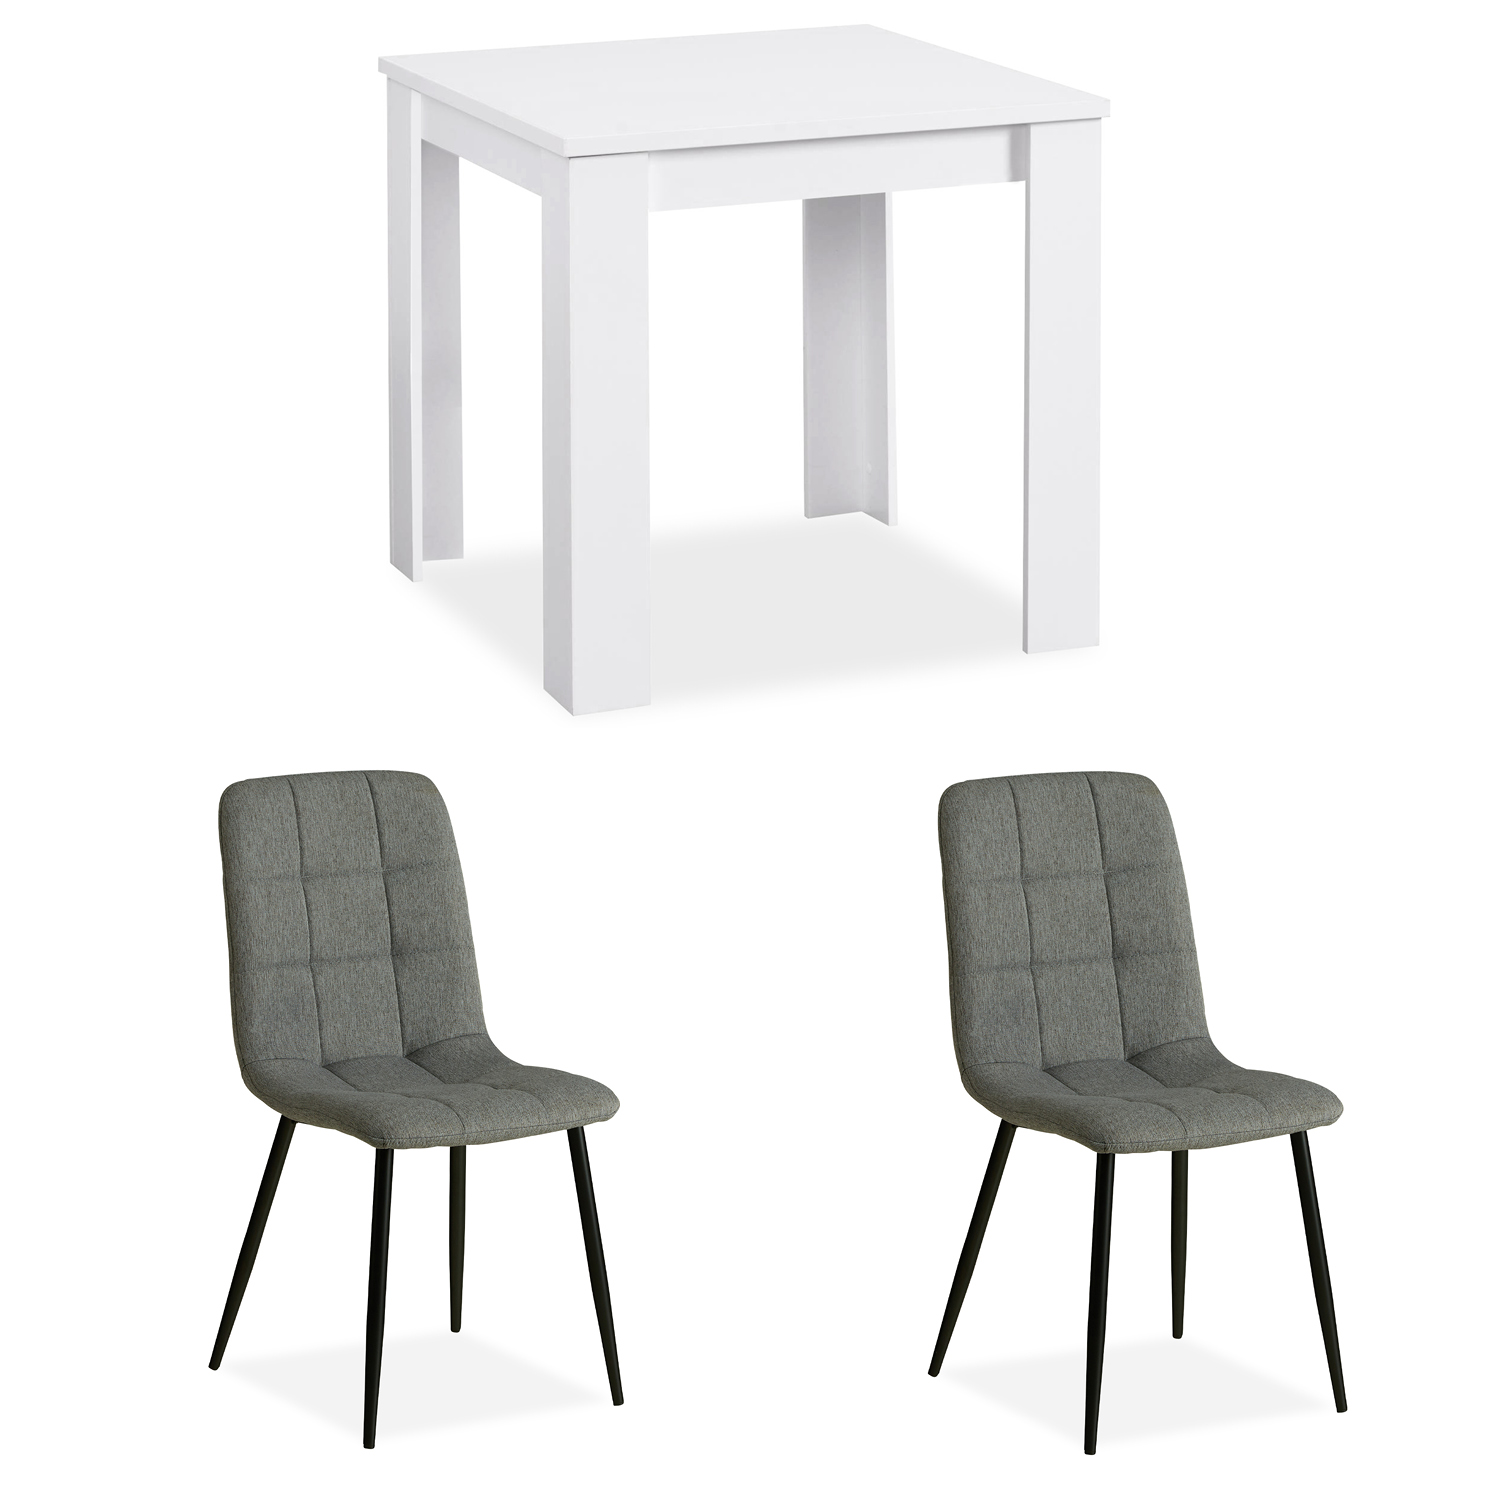 Modern Dining Table White 80x80 cm with 2 Grey Linen Chairs Dining Room Table Wooden Table